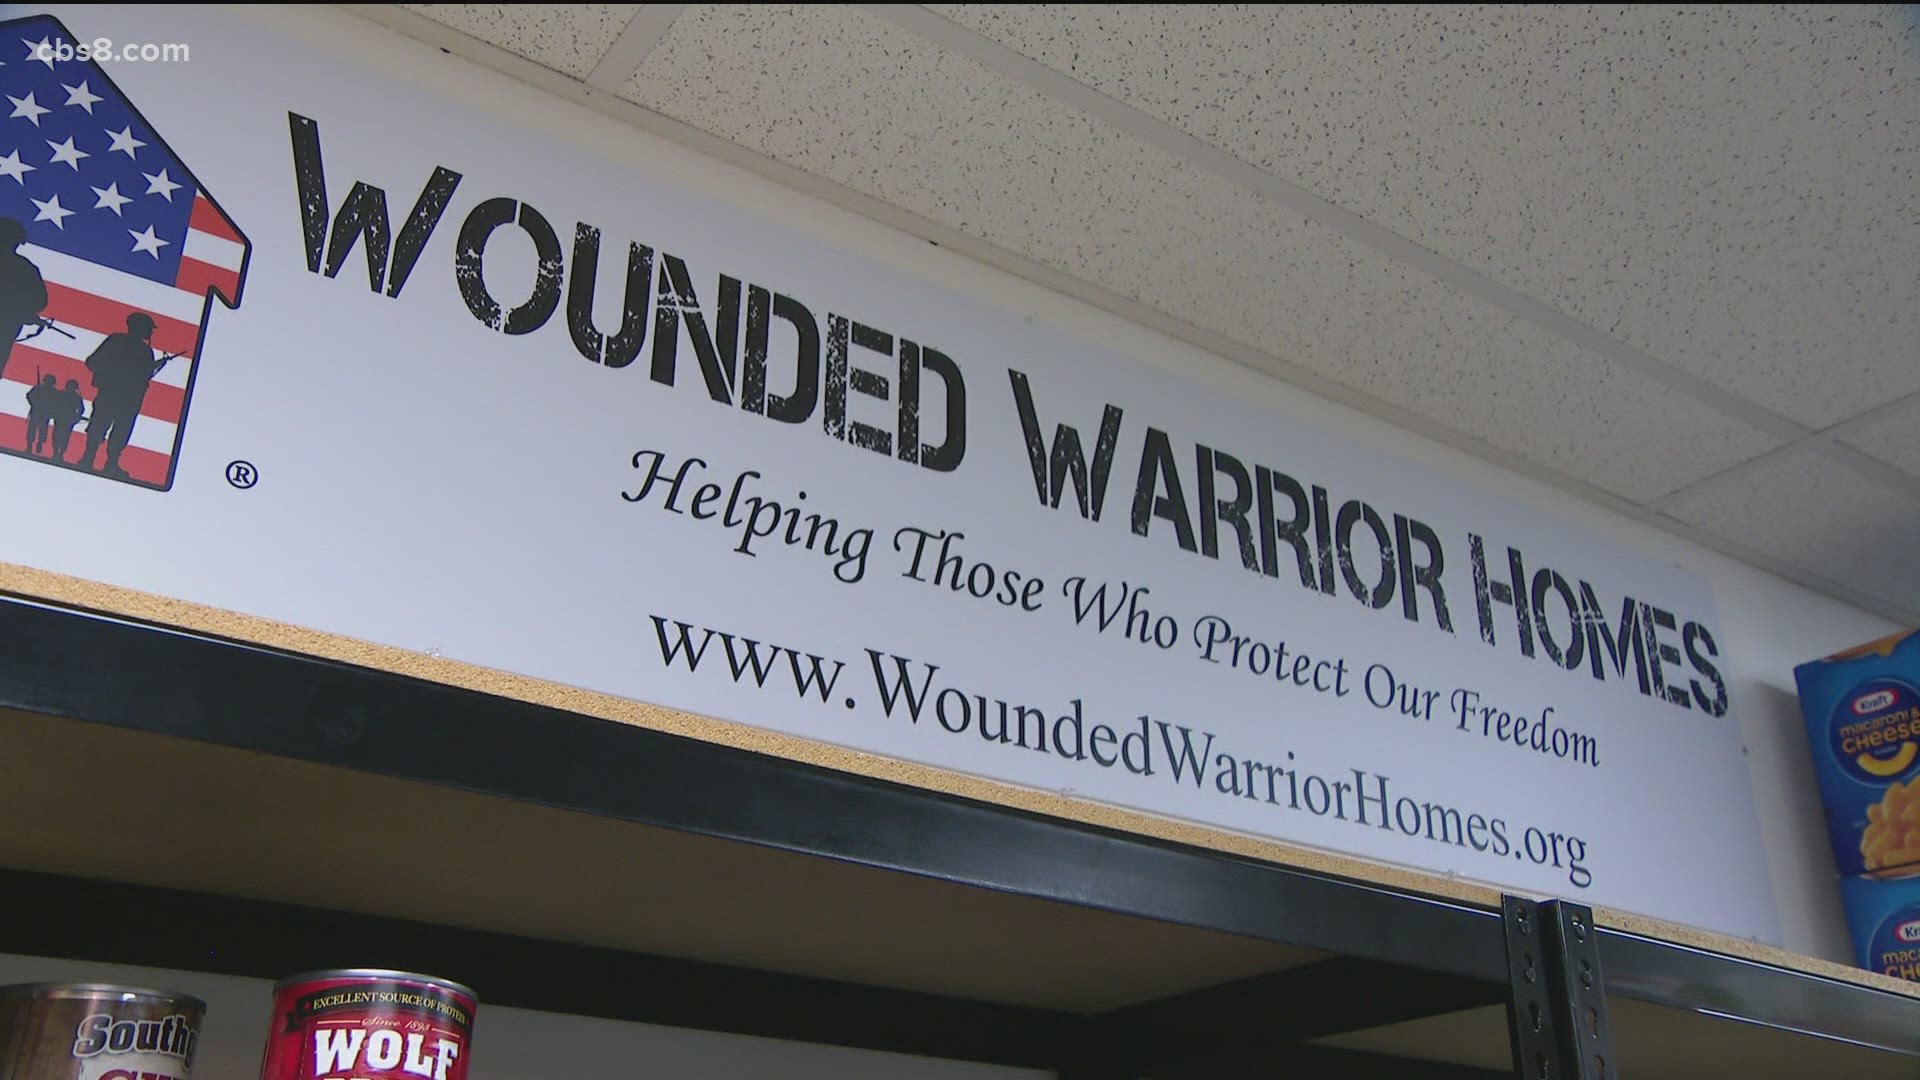 When the pandemic began, Wounded Warrior Homes also expanded the food pantry to serve the veteran community in San Diego.